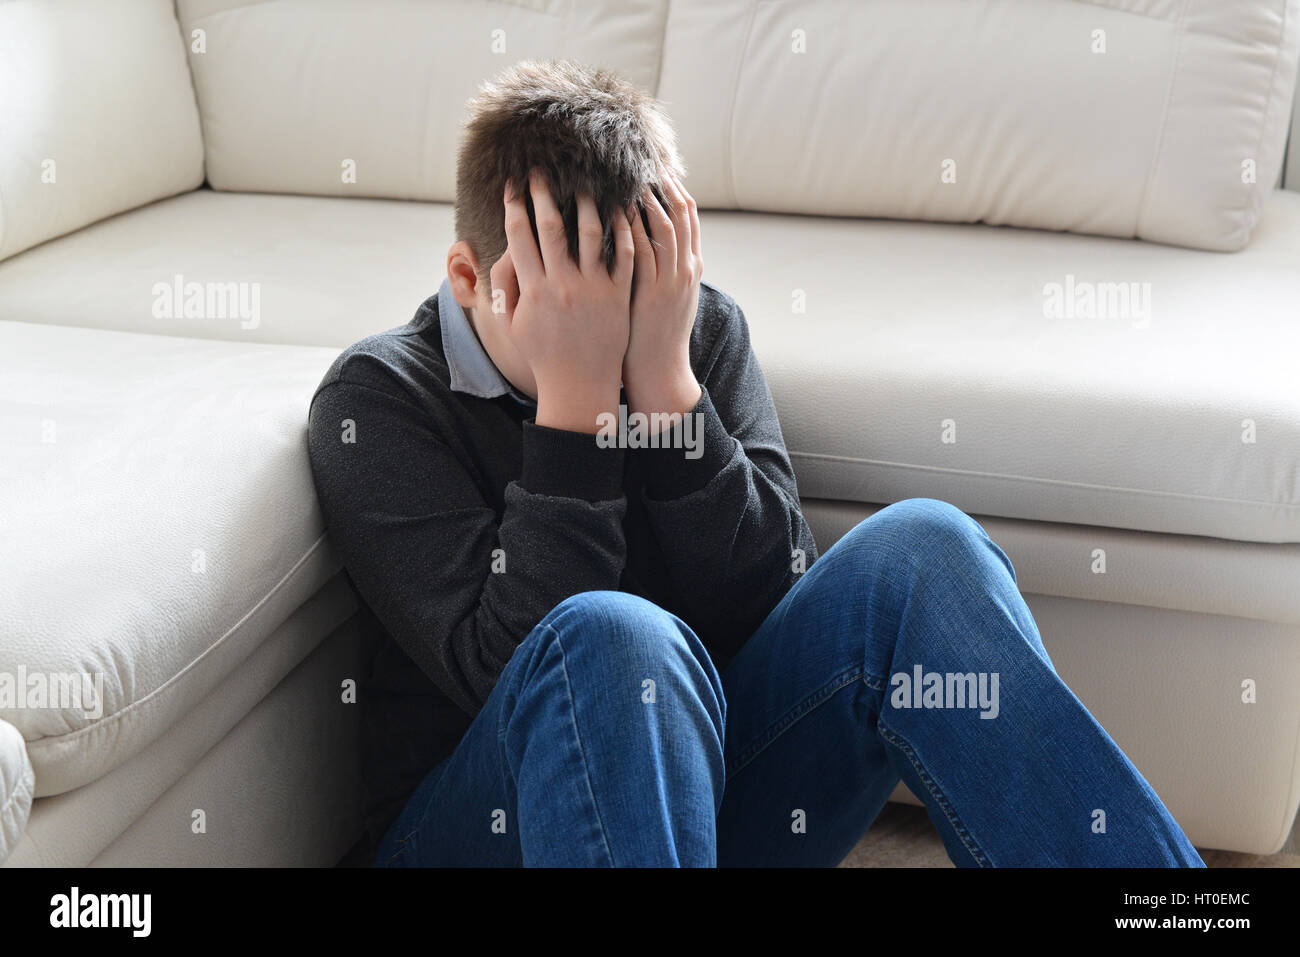 Upset teenager 13 years, he sits near sofa covering her face with her hands Stock Photo